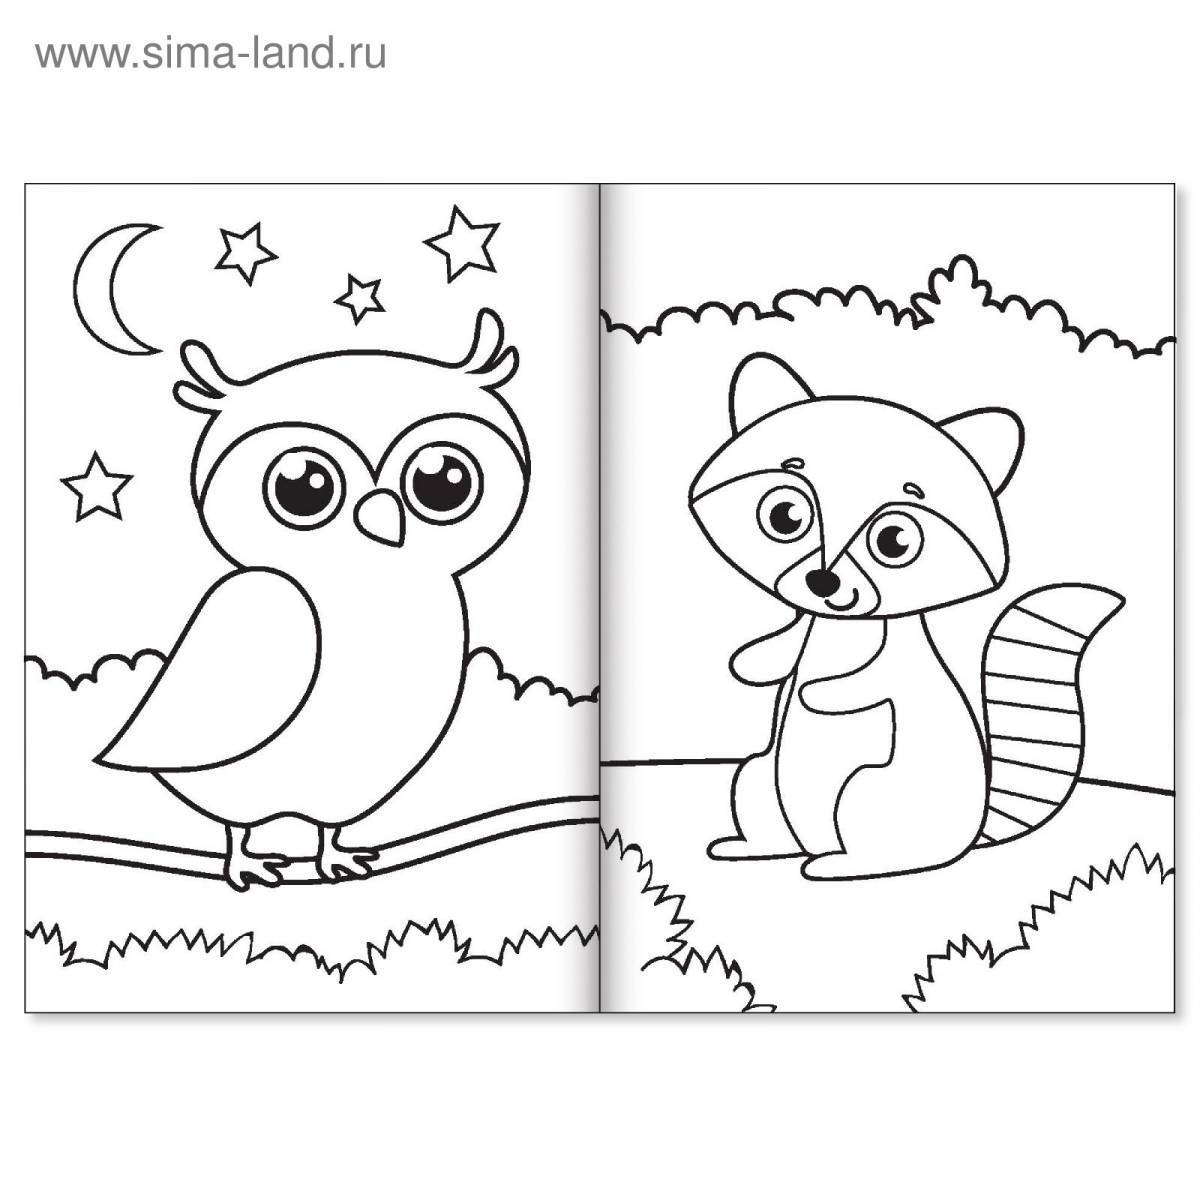 Playful animal coloring book for kids 5-6 years old